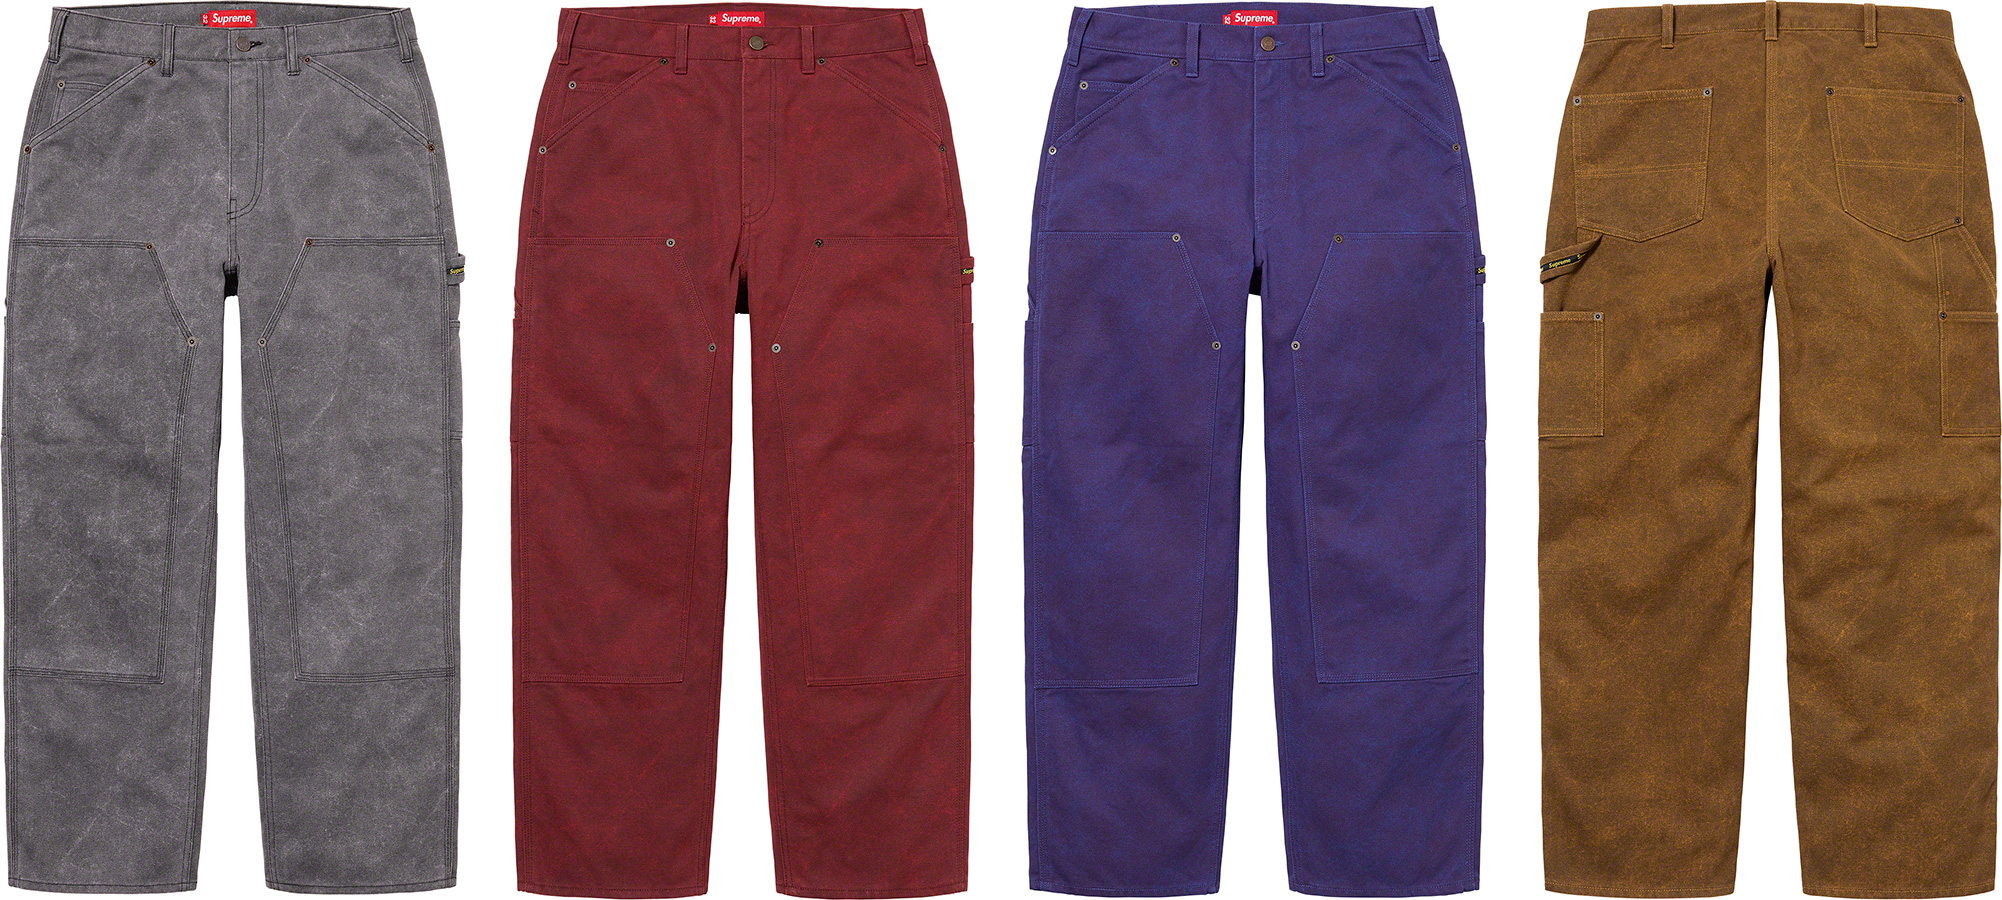 Supreme Canvas Double Knee Painter Pant - ワークパンツ